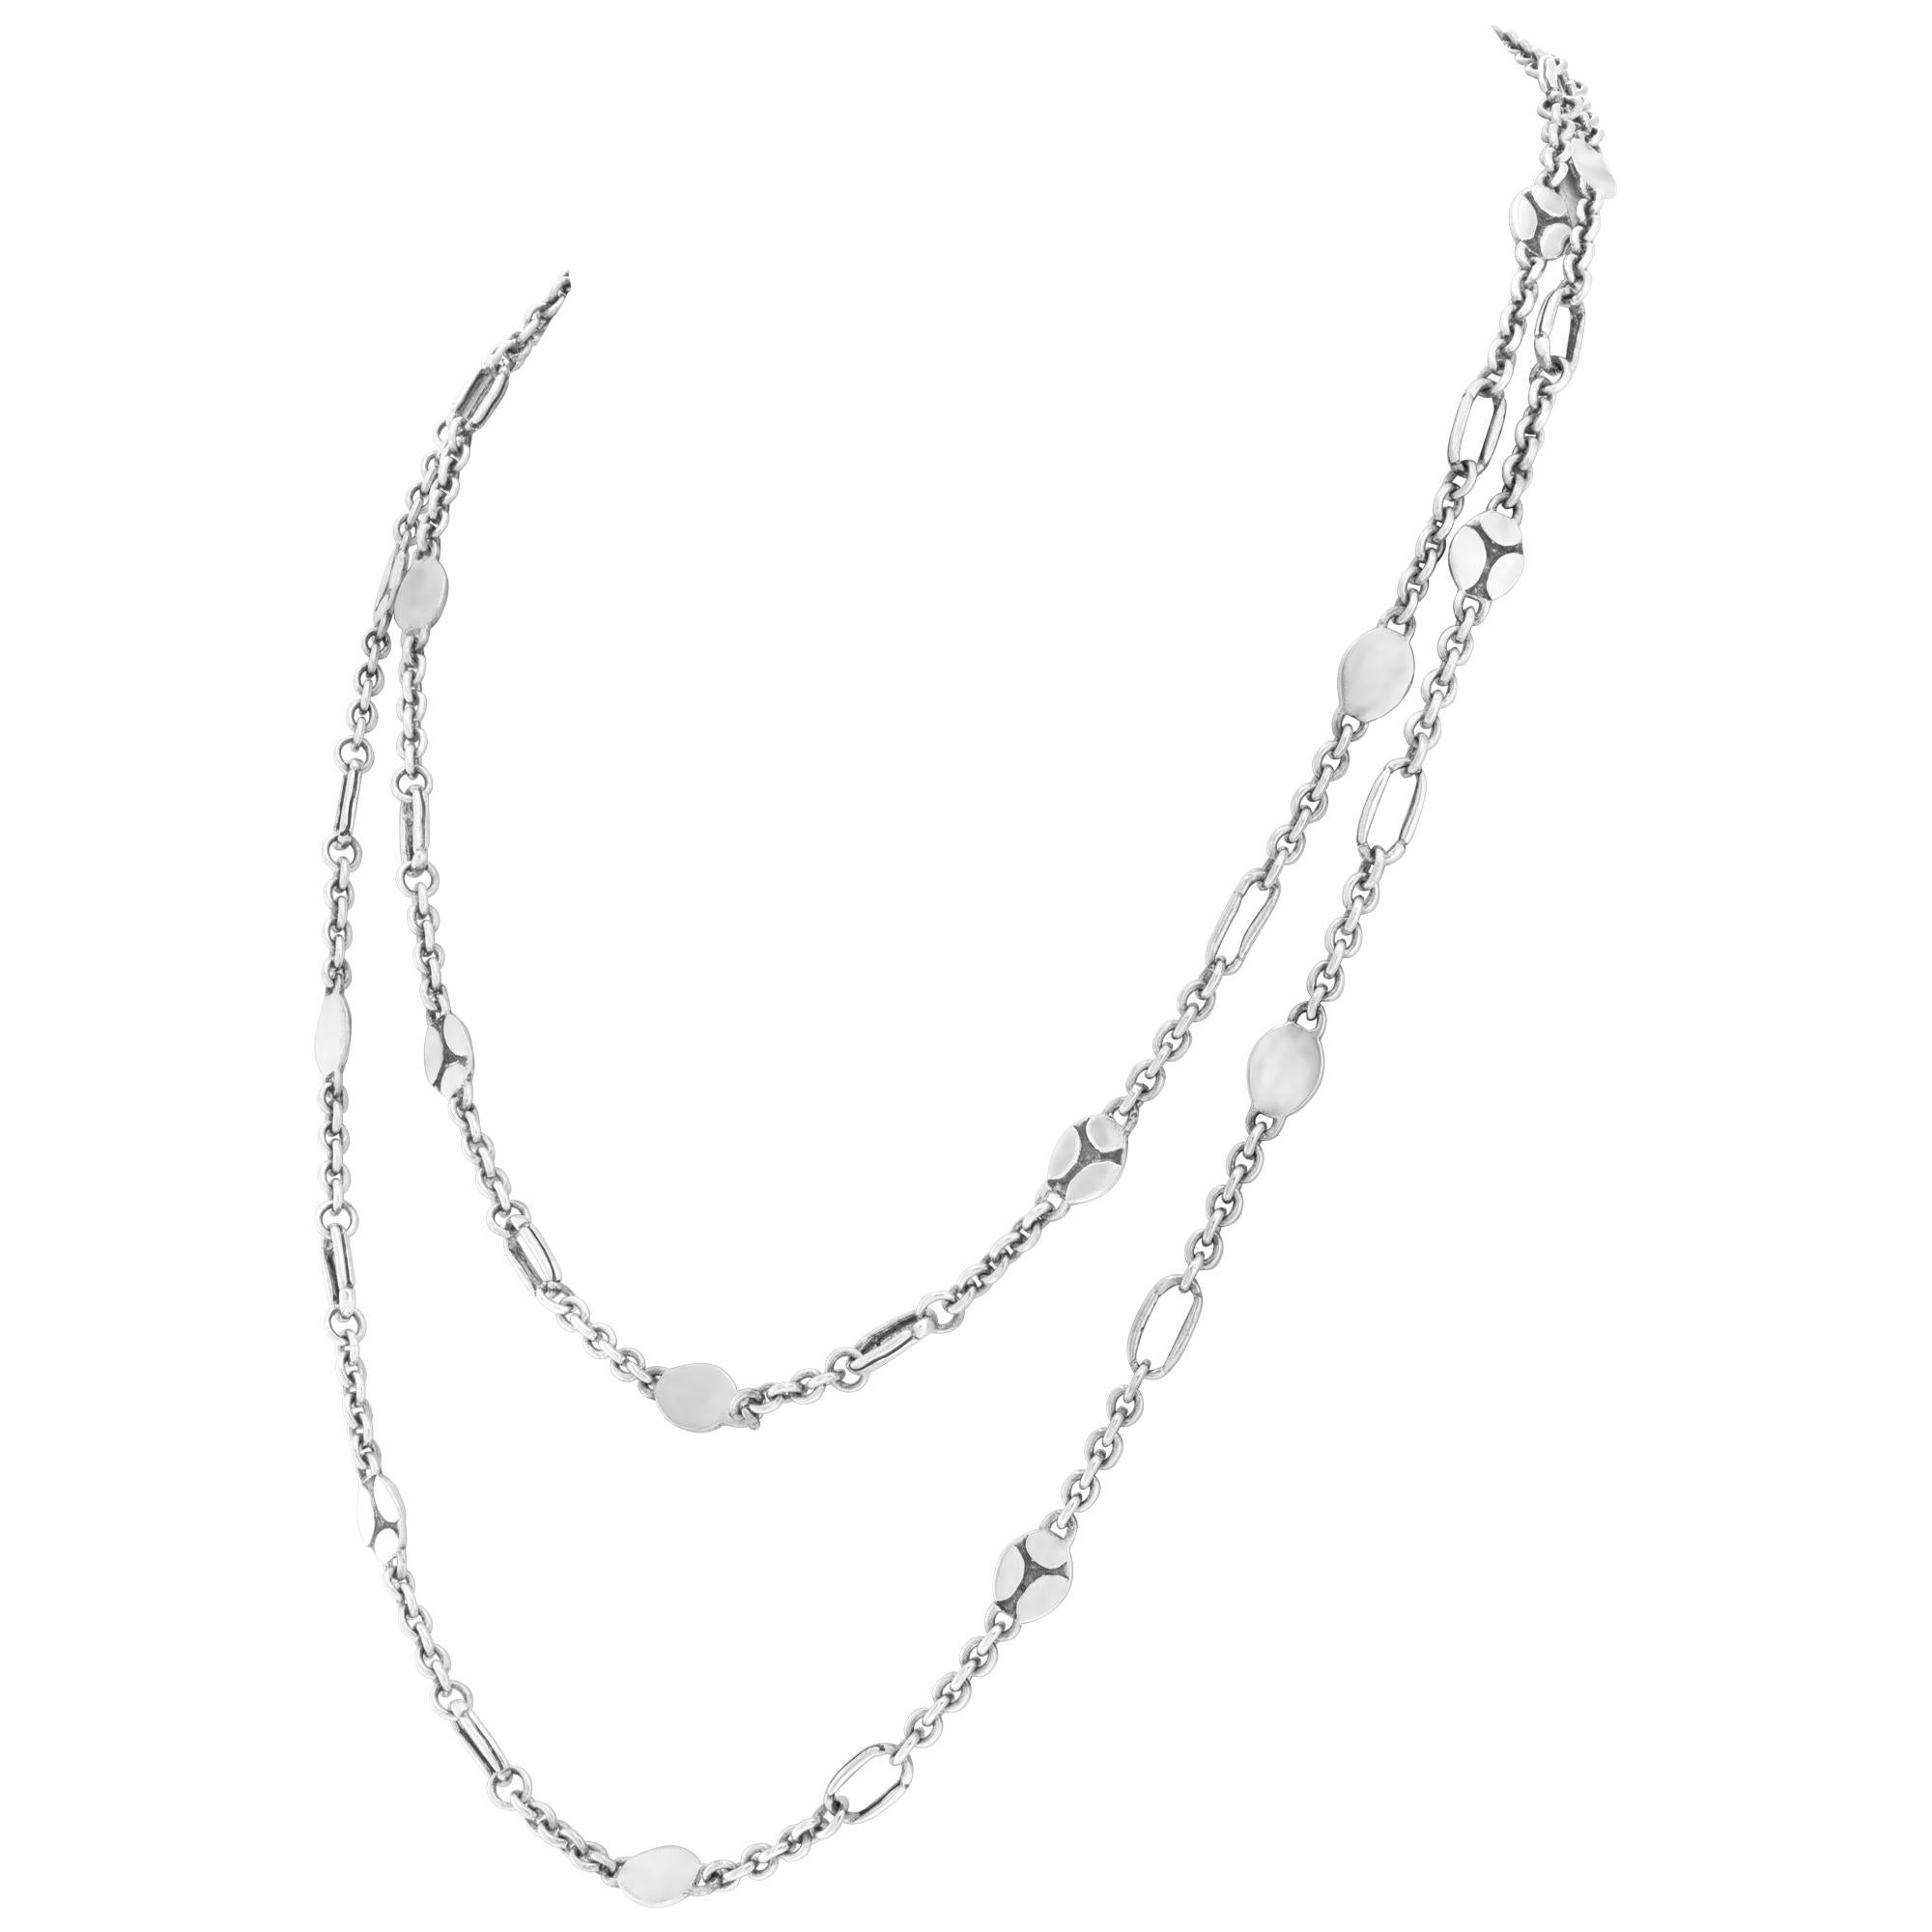 John Hardy Koli Collection Chain In Sterling Silver. Length 35 inches.